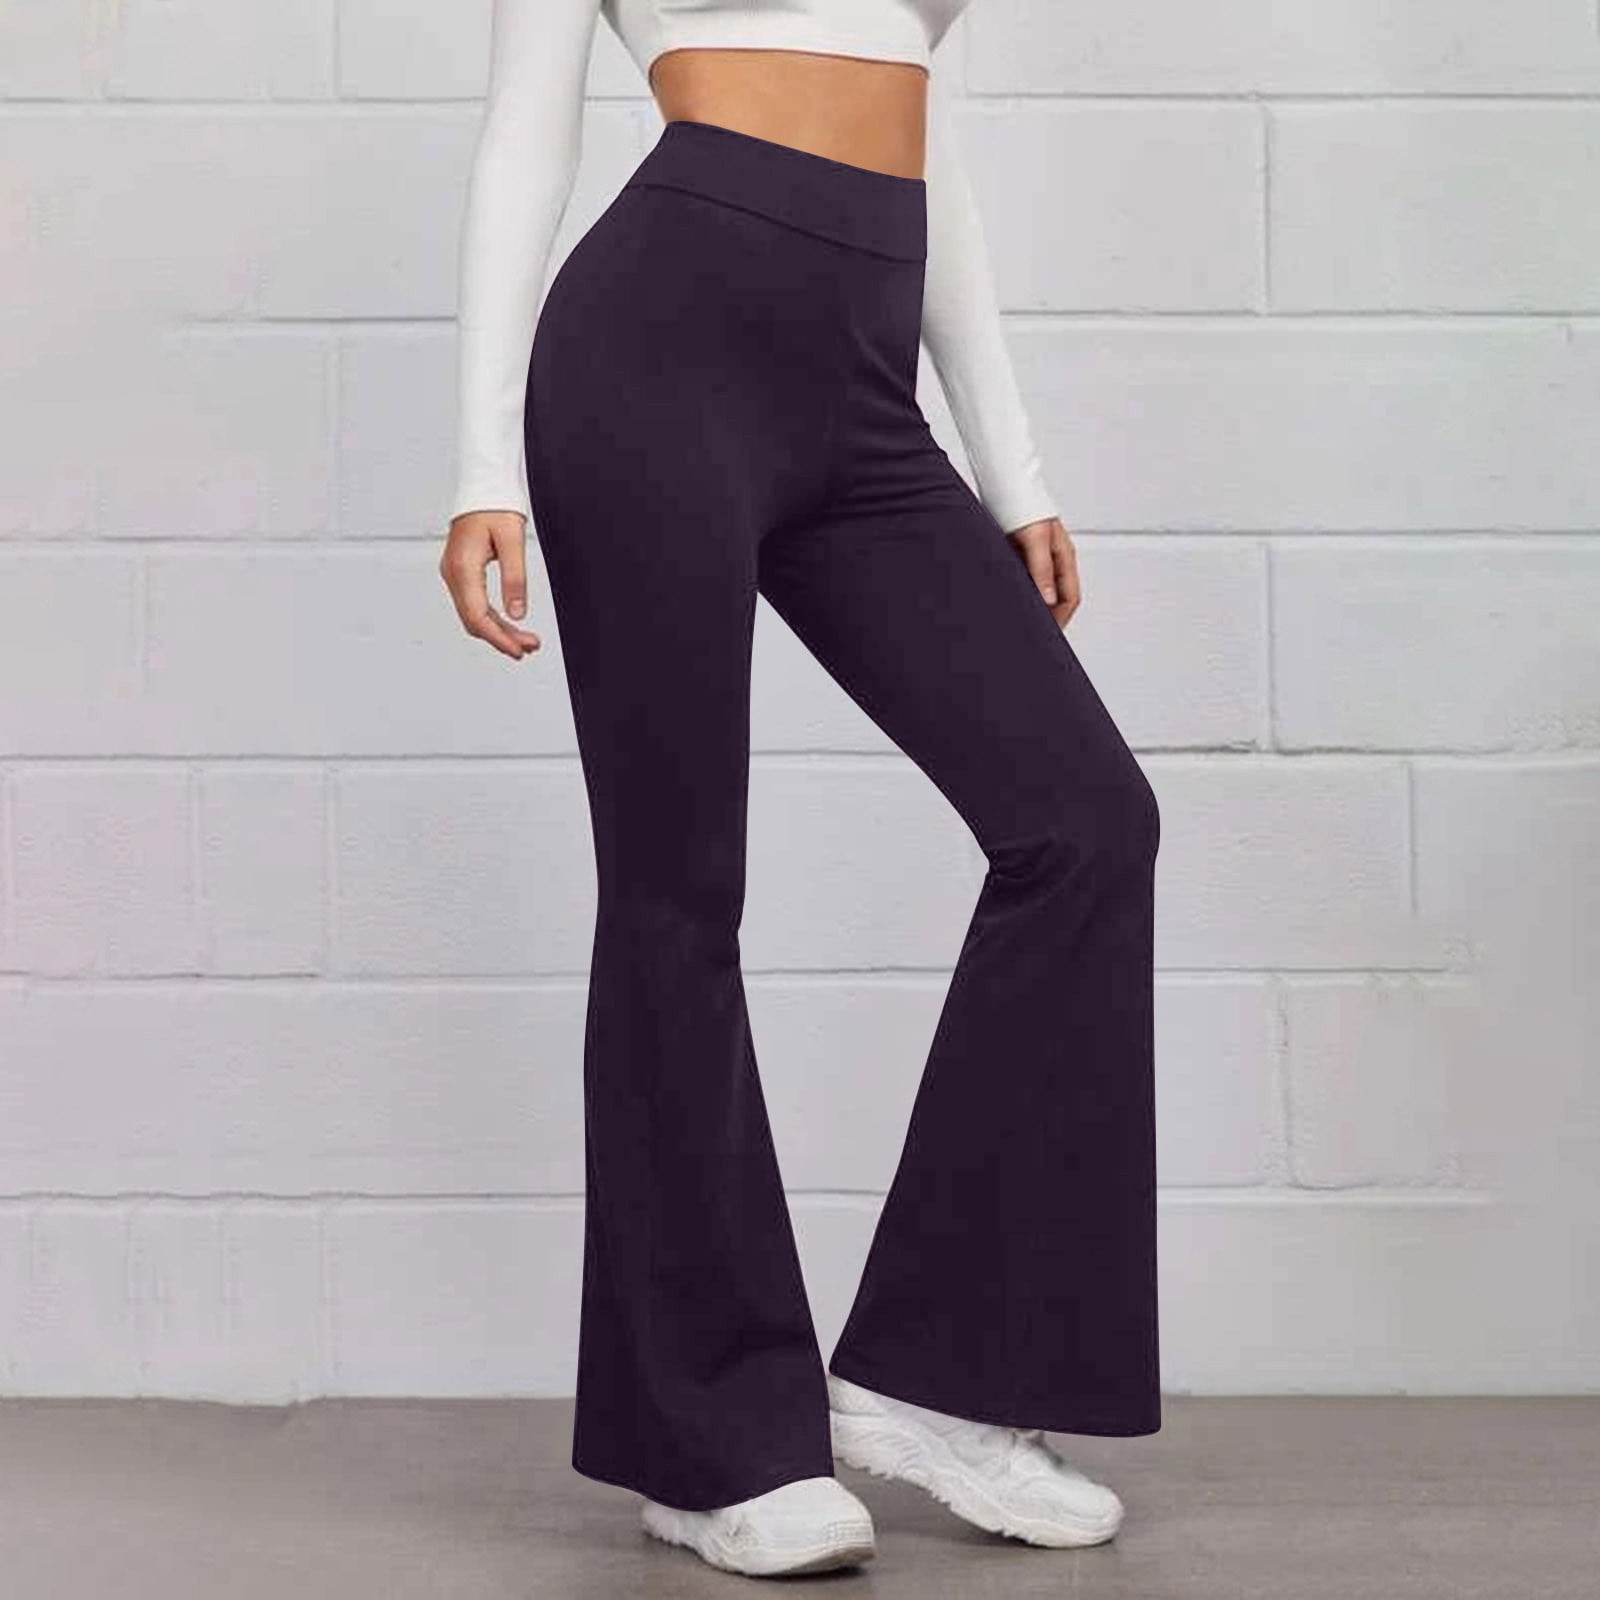 SELONE Pants for Women 70s Leggings Workout High Waist High Rise Flared  Elastic Waist Casual Slim Fit Yoga Athletic Slim High Solid Color Sports  Pants Everyday Wear Purple XXL 